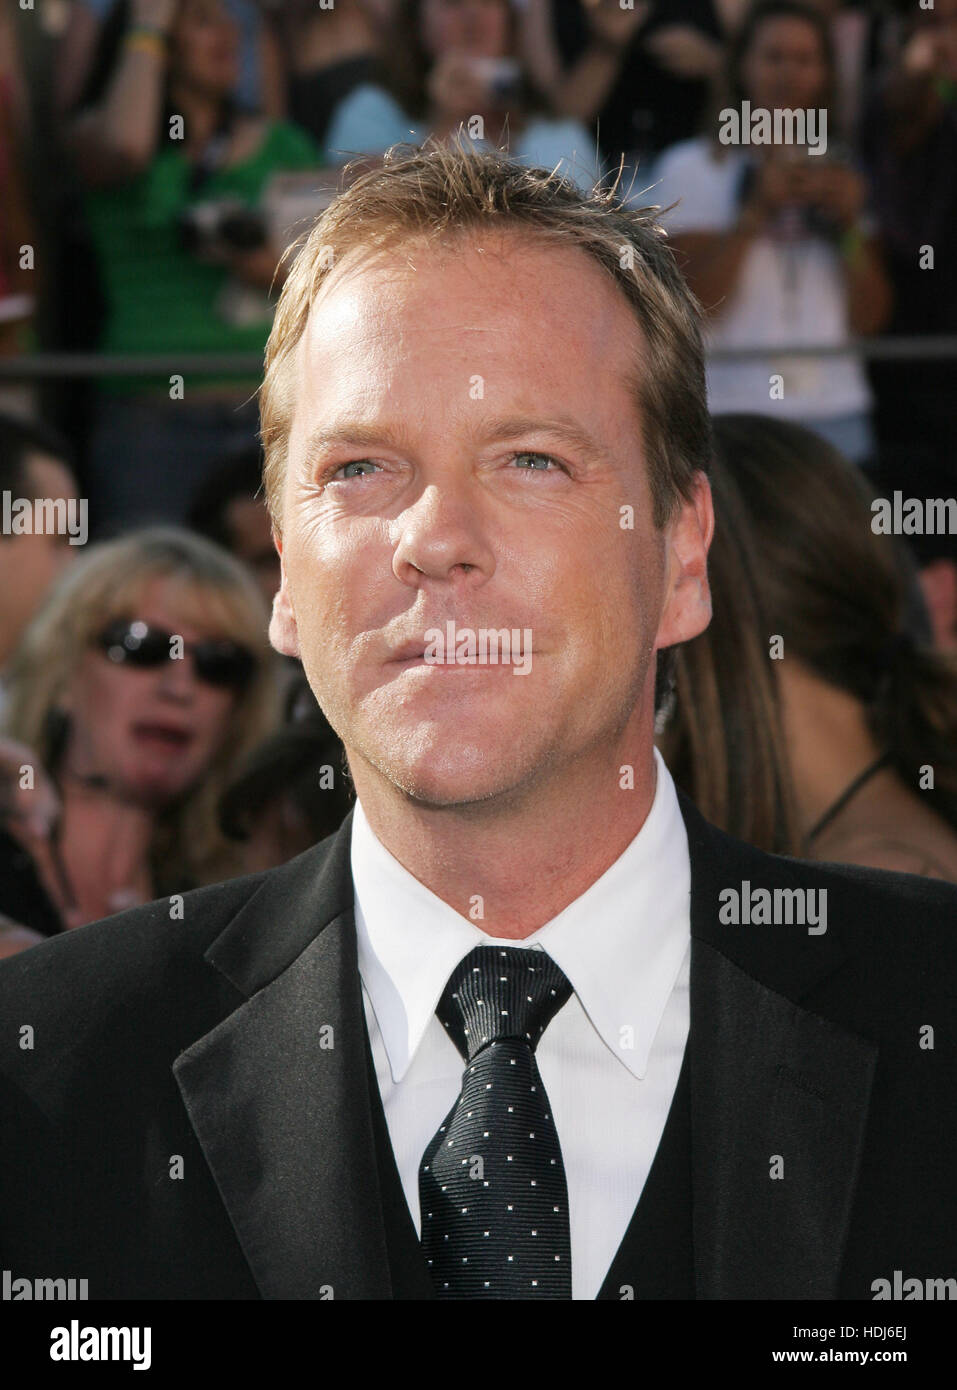 Kiefer Sutherland at the 56th Annual Emmy Awards  on September 19, 2004 in Los Angeles, California. Photo credit: Francis Specker Stock Photo